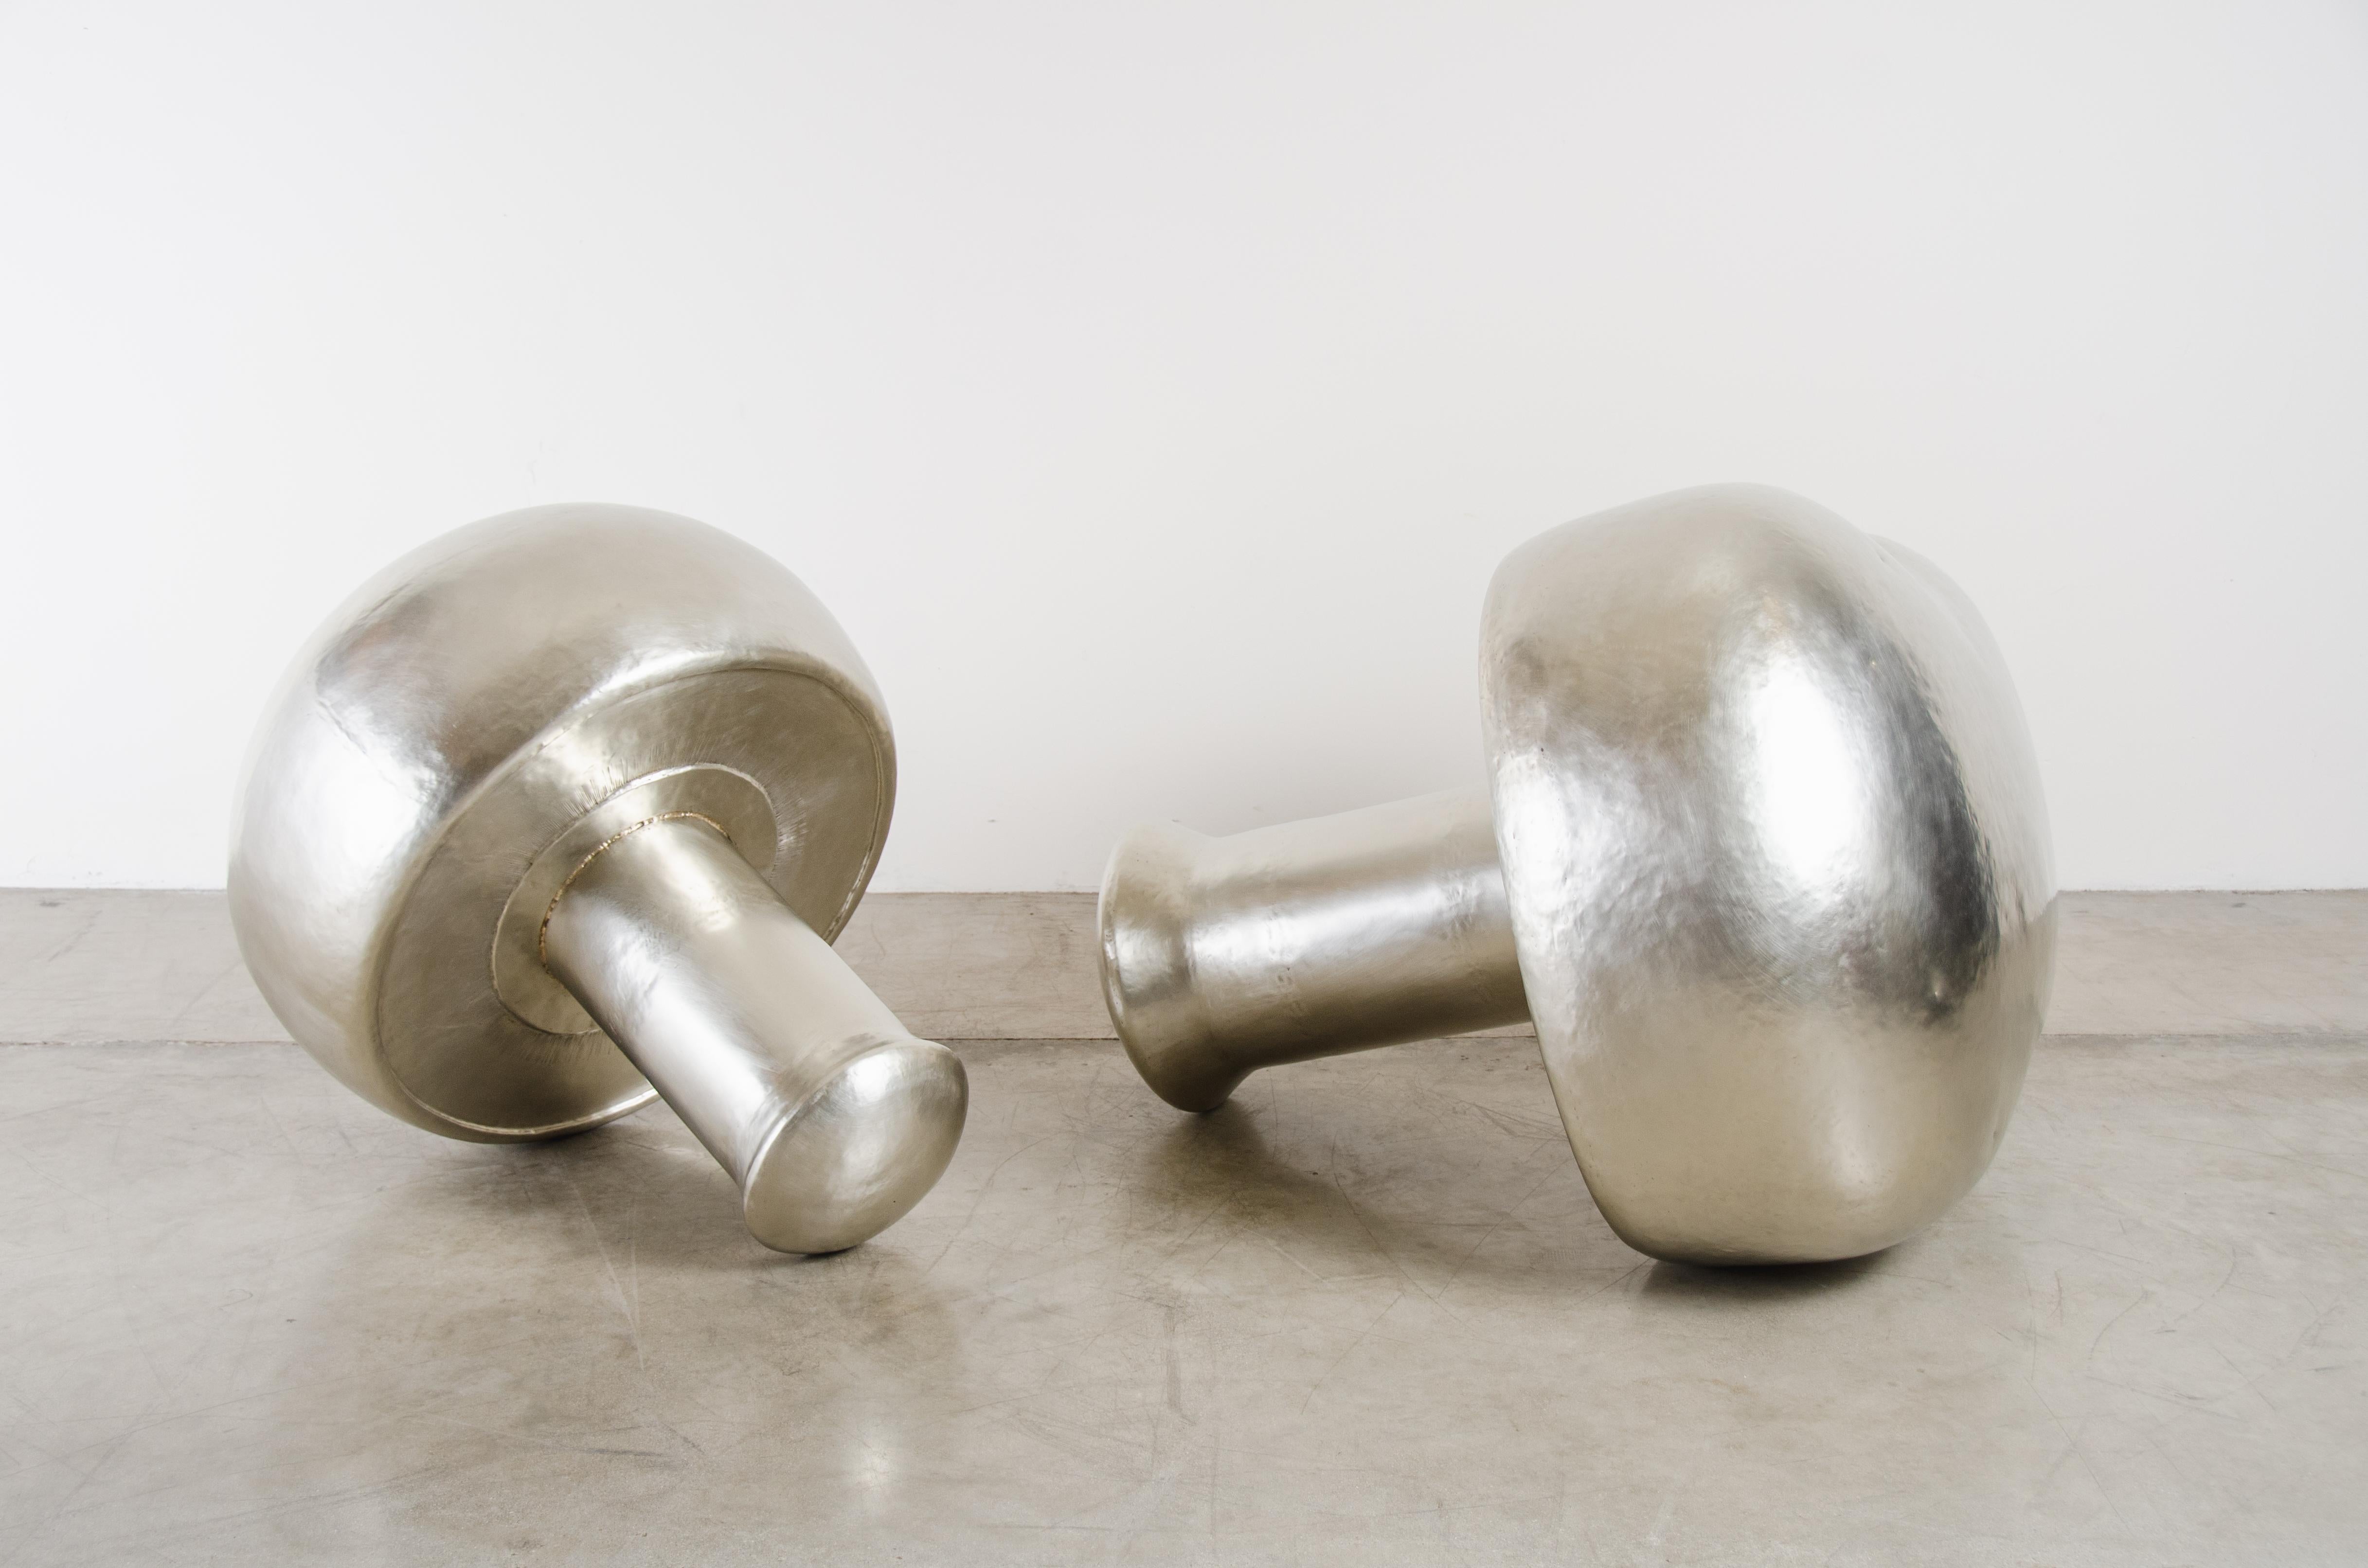 Minimalist Contemporary Hand Repoussé White Bronze Mushroom Sculptures by Robert Kuo For Sale